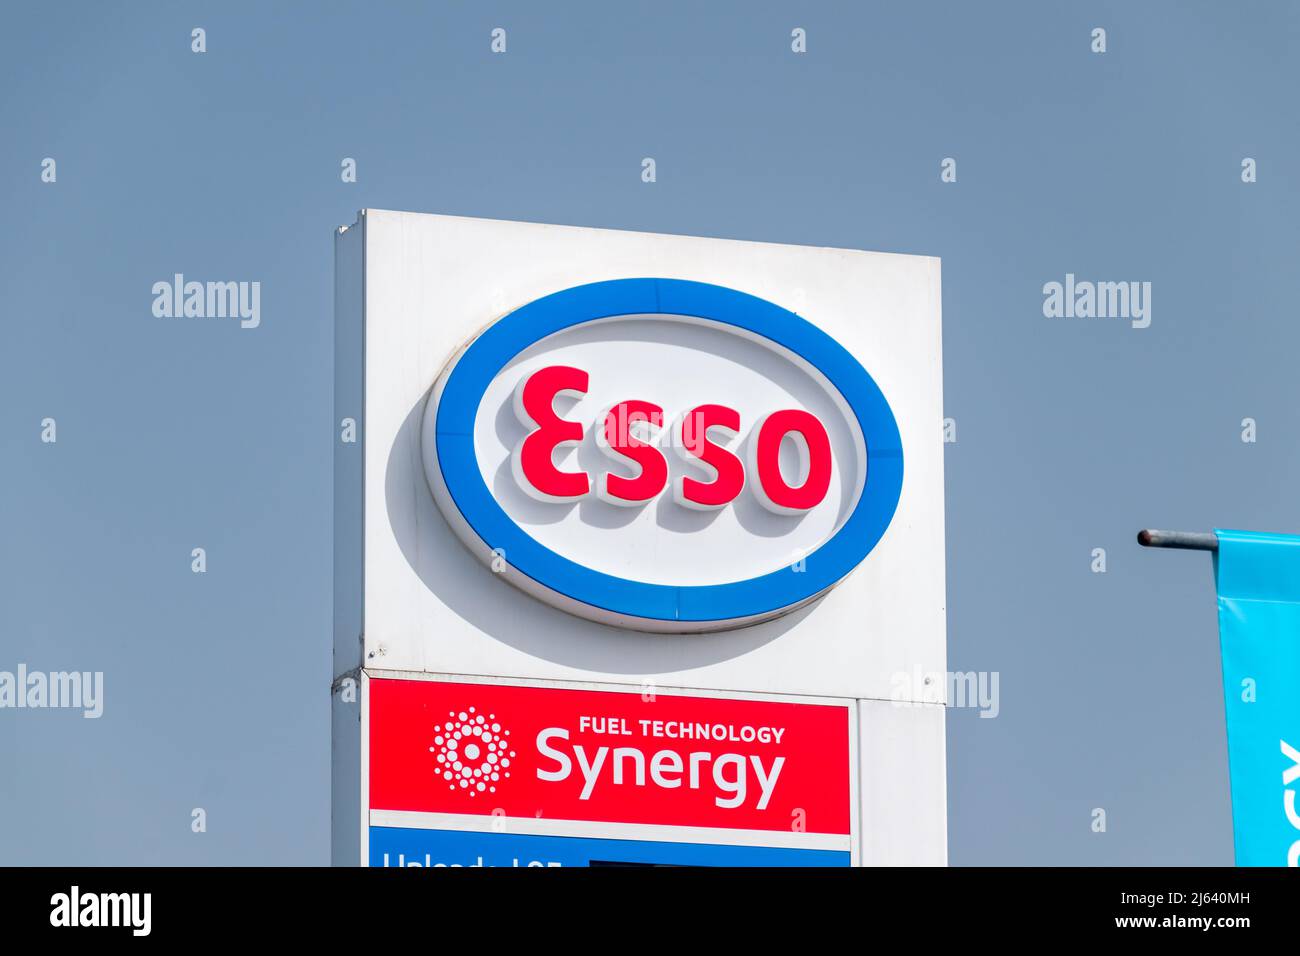 Paphos, Cyprus - April 2, 2022: Logo and sign of Esso on gas station in Paphos. Esso is a trading name for ExxonMobil. Stock Photo